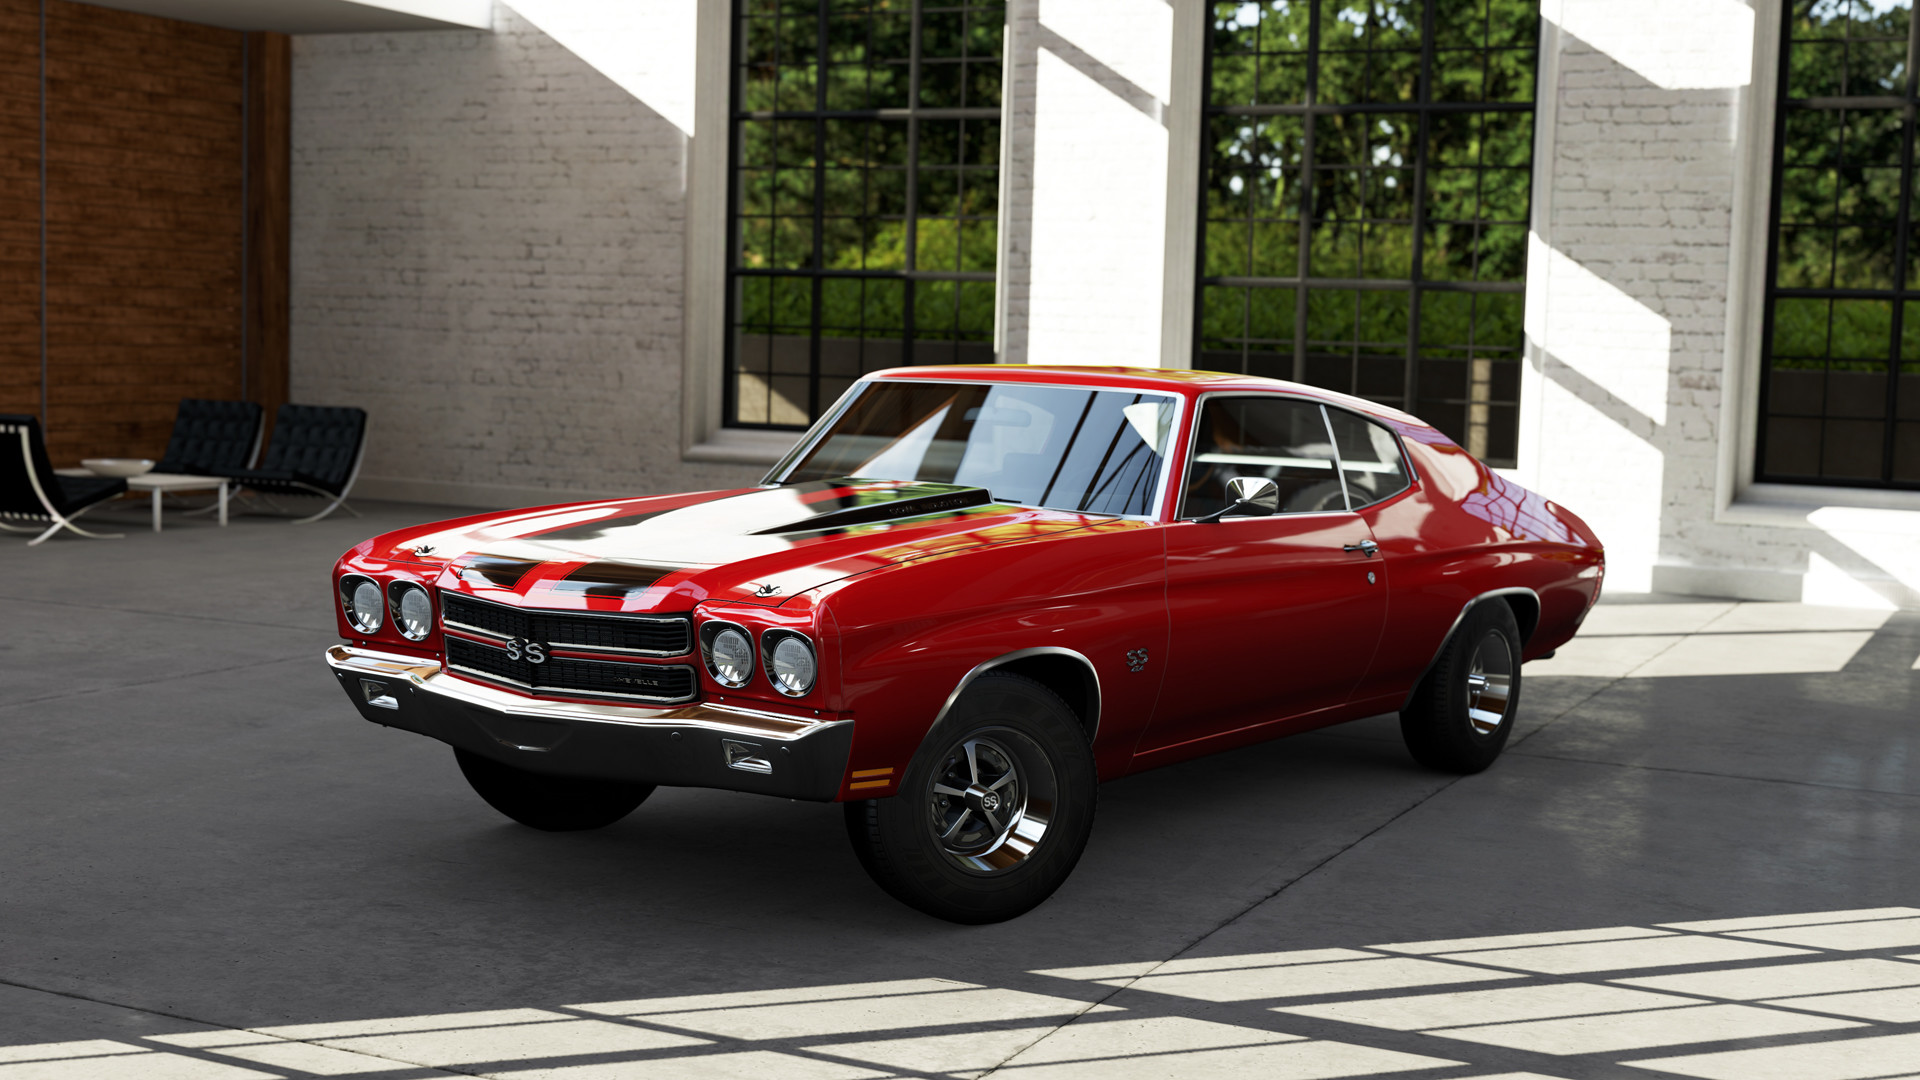 1970 Chevelle Ss Wallpaper 58 Images